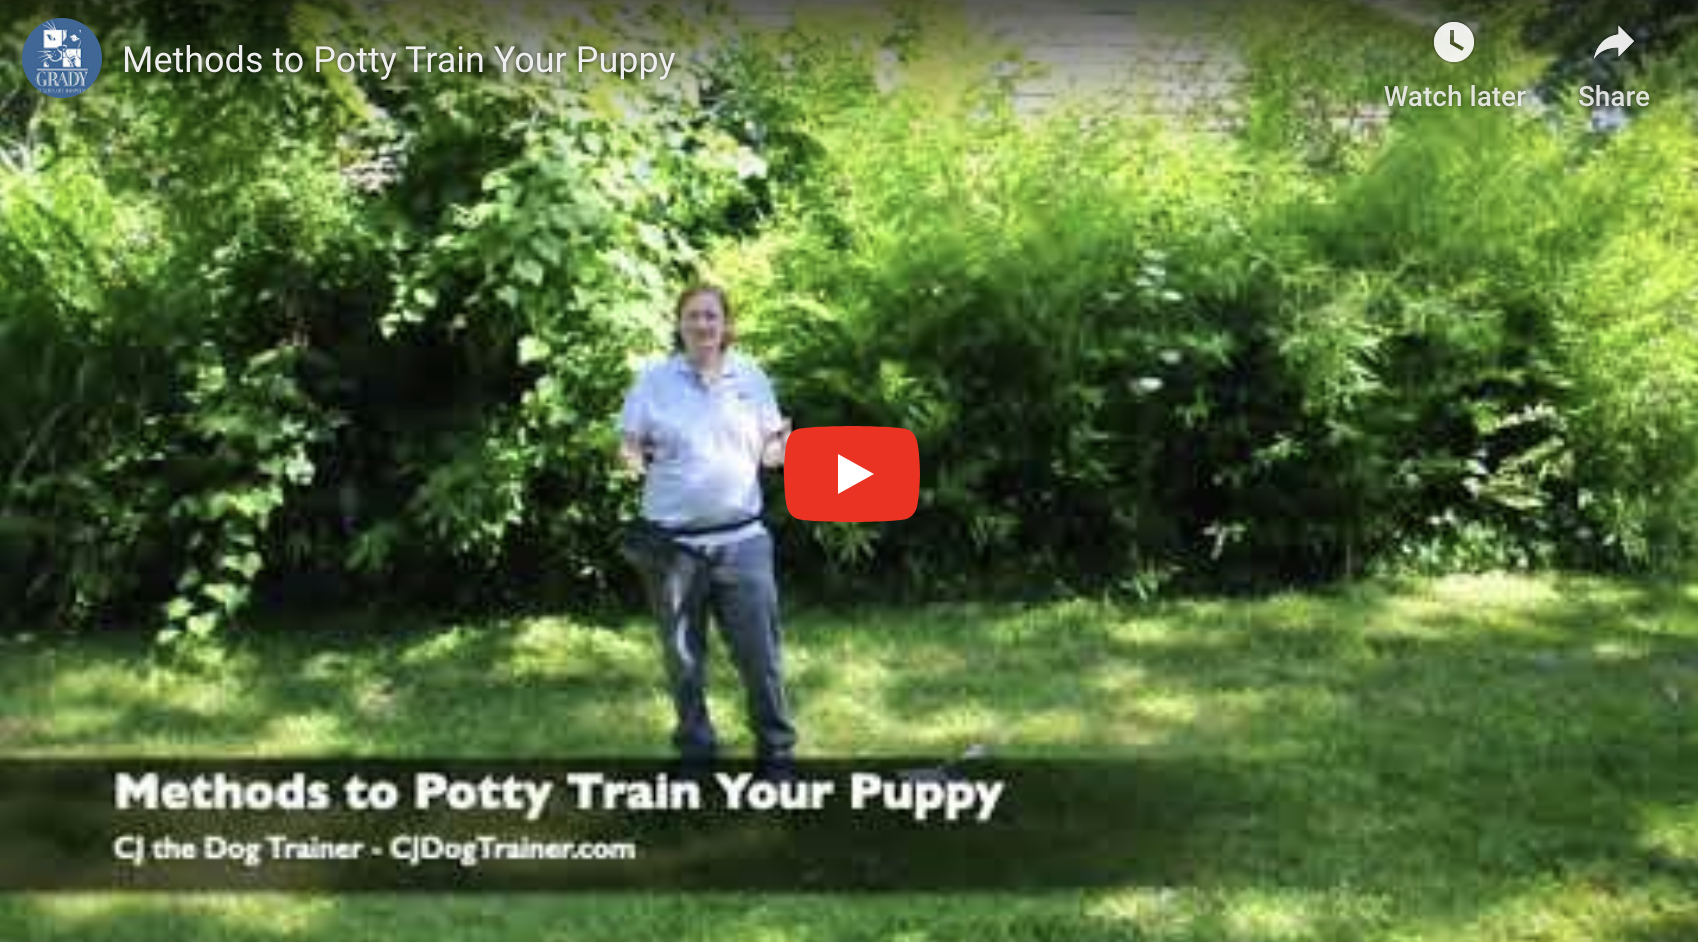 Methods to Potty Train Your Puppy